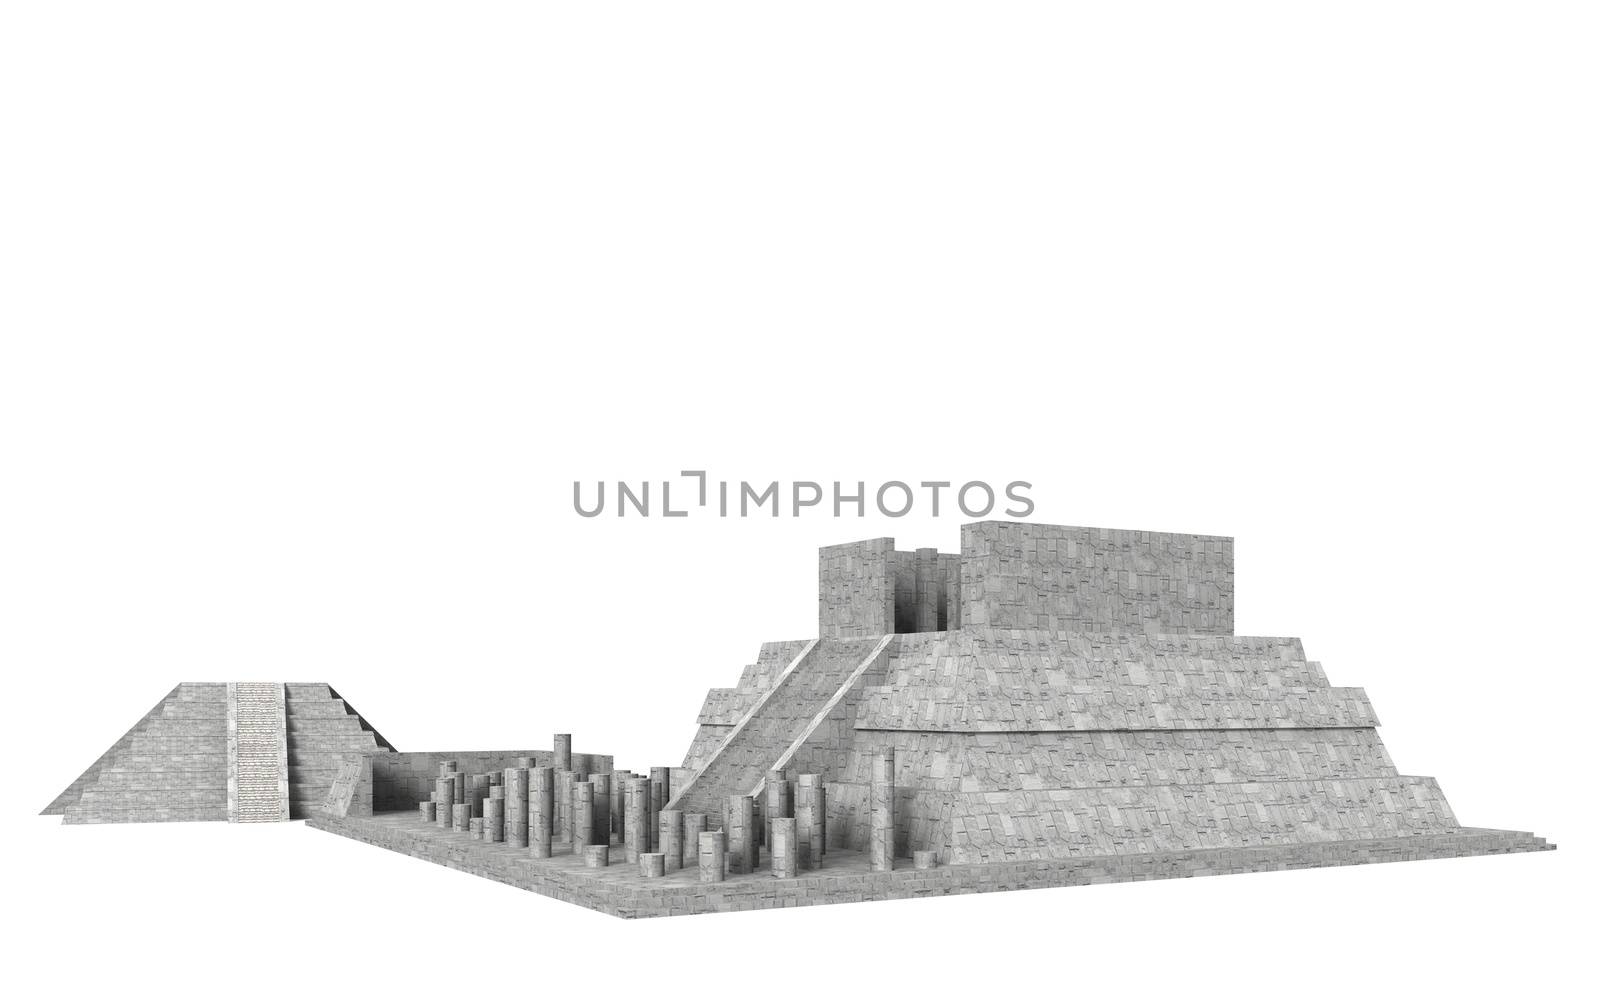 Chichen Itza is one of the most important ruins on Mexico's Yucat��n Peninsula.